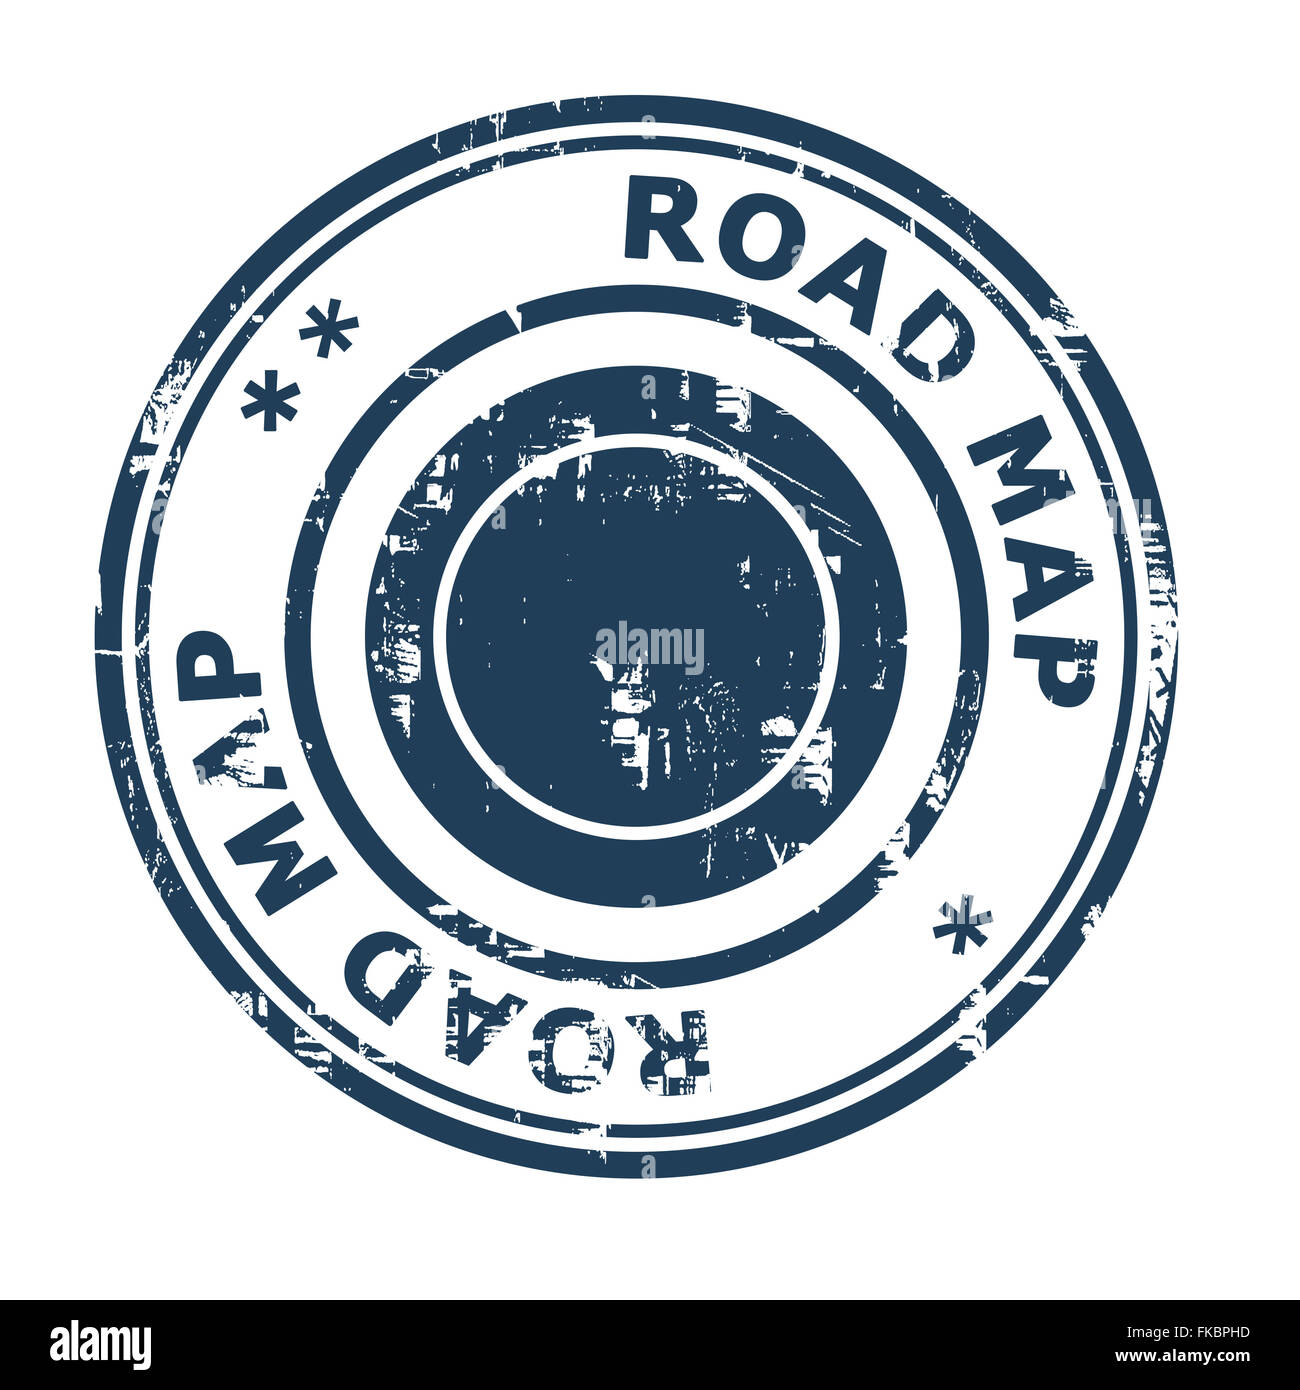 Road map business concept stamp isolated on a white background. Stock Photo